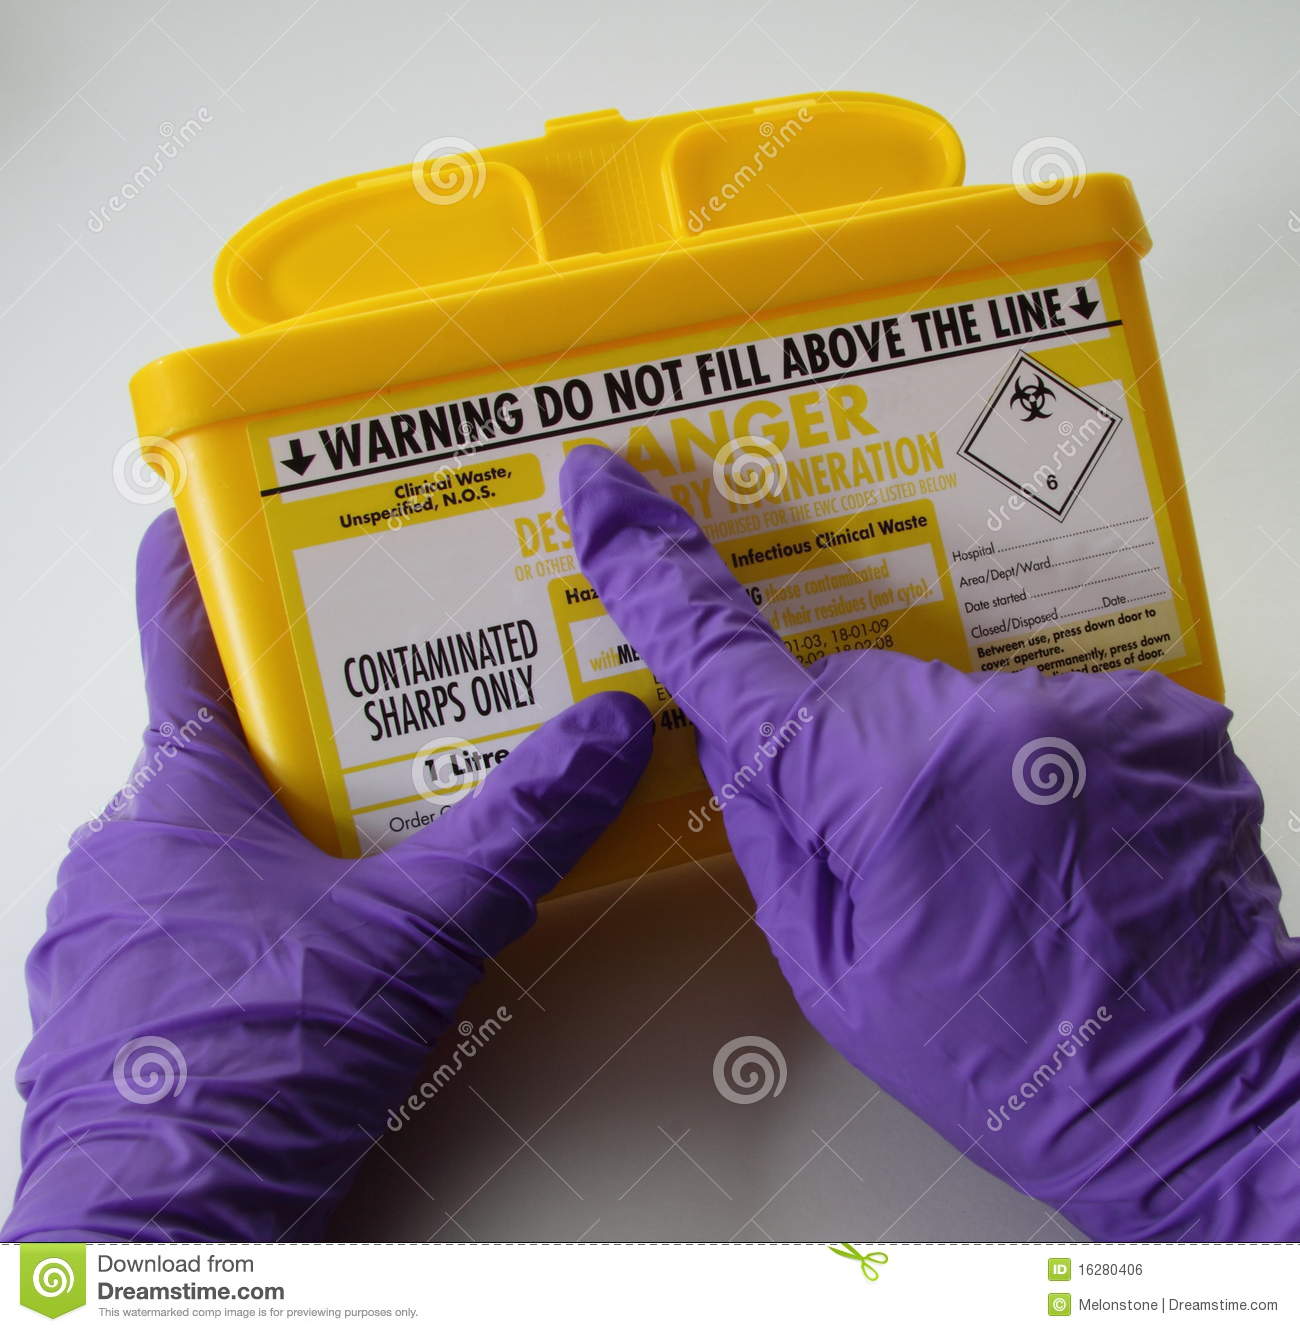 Hands In Purple Medical Gloves Holding A Sharps Hypodermic Needle    